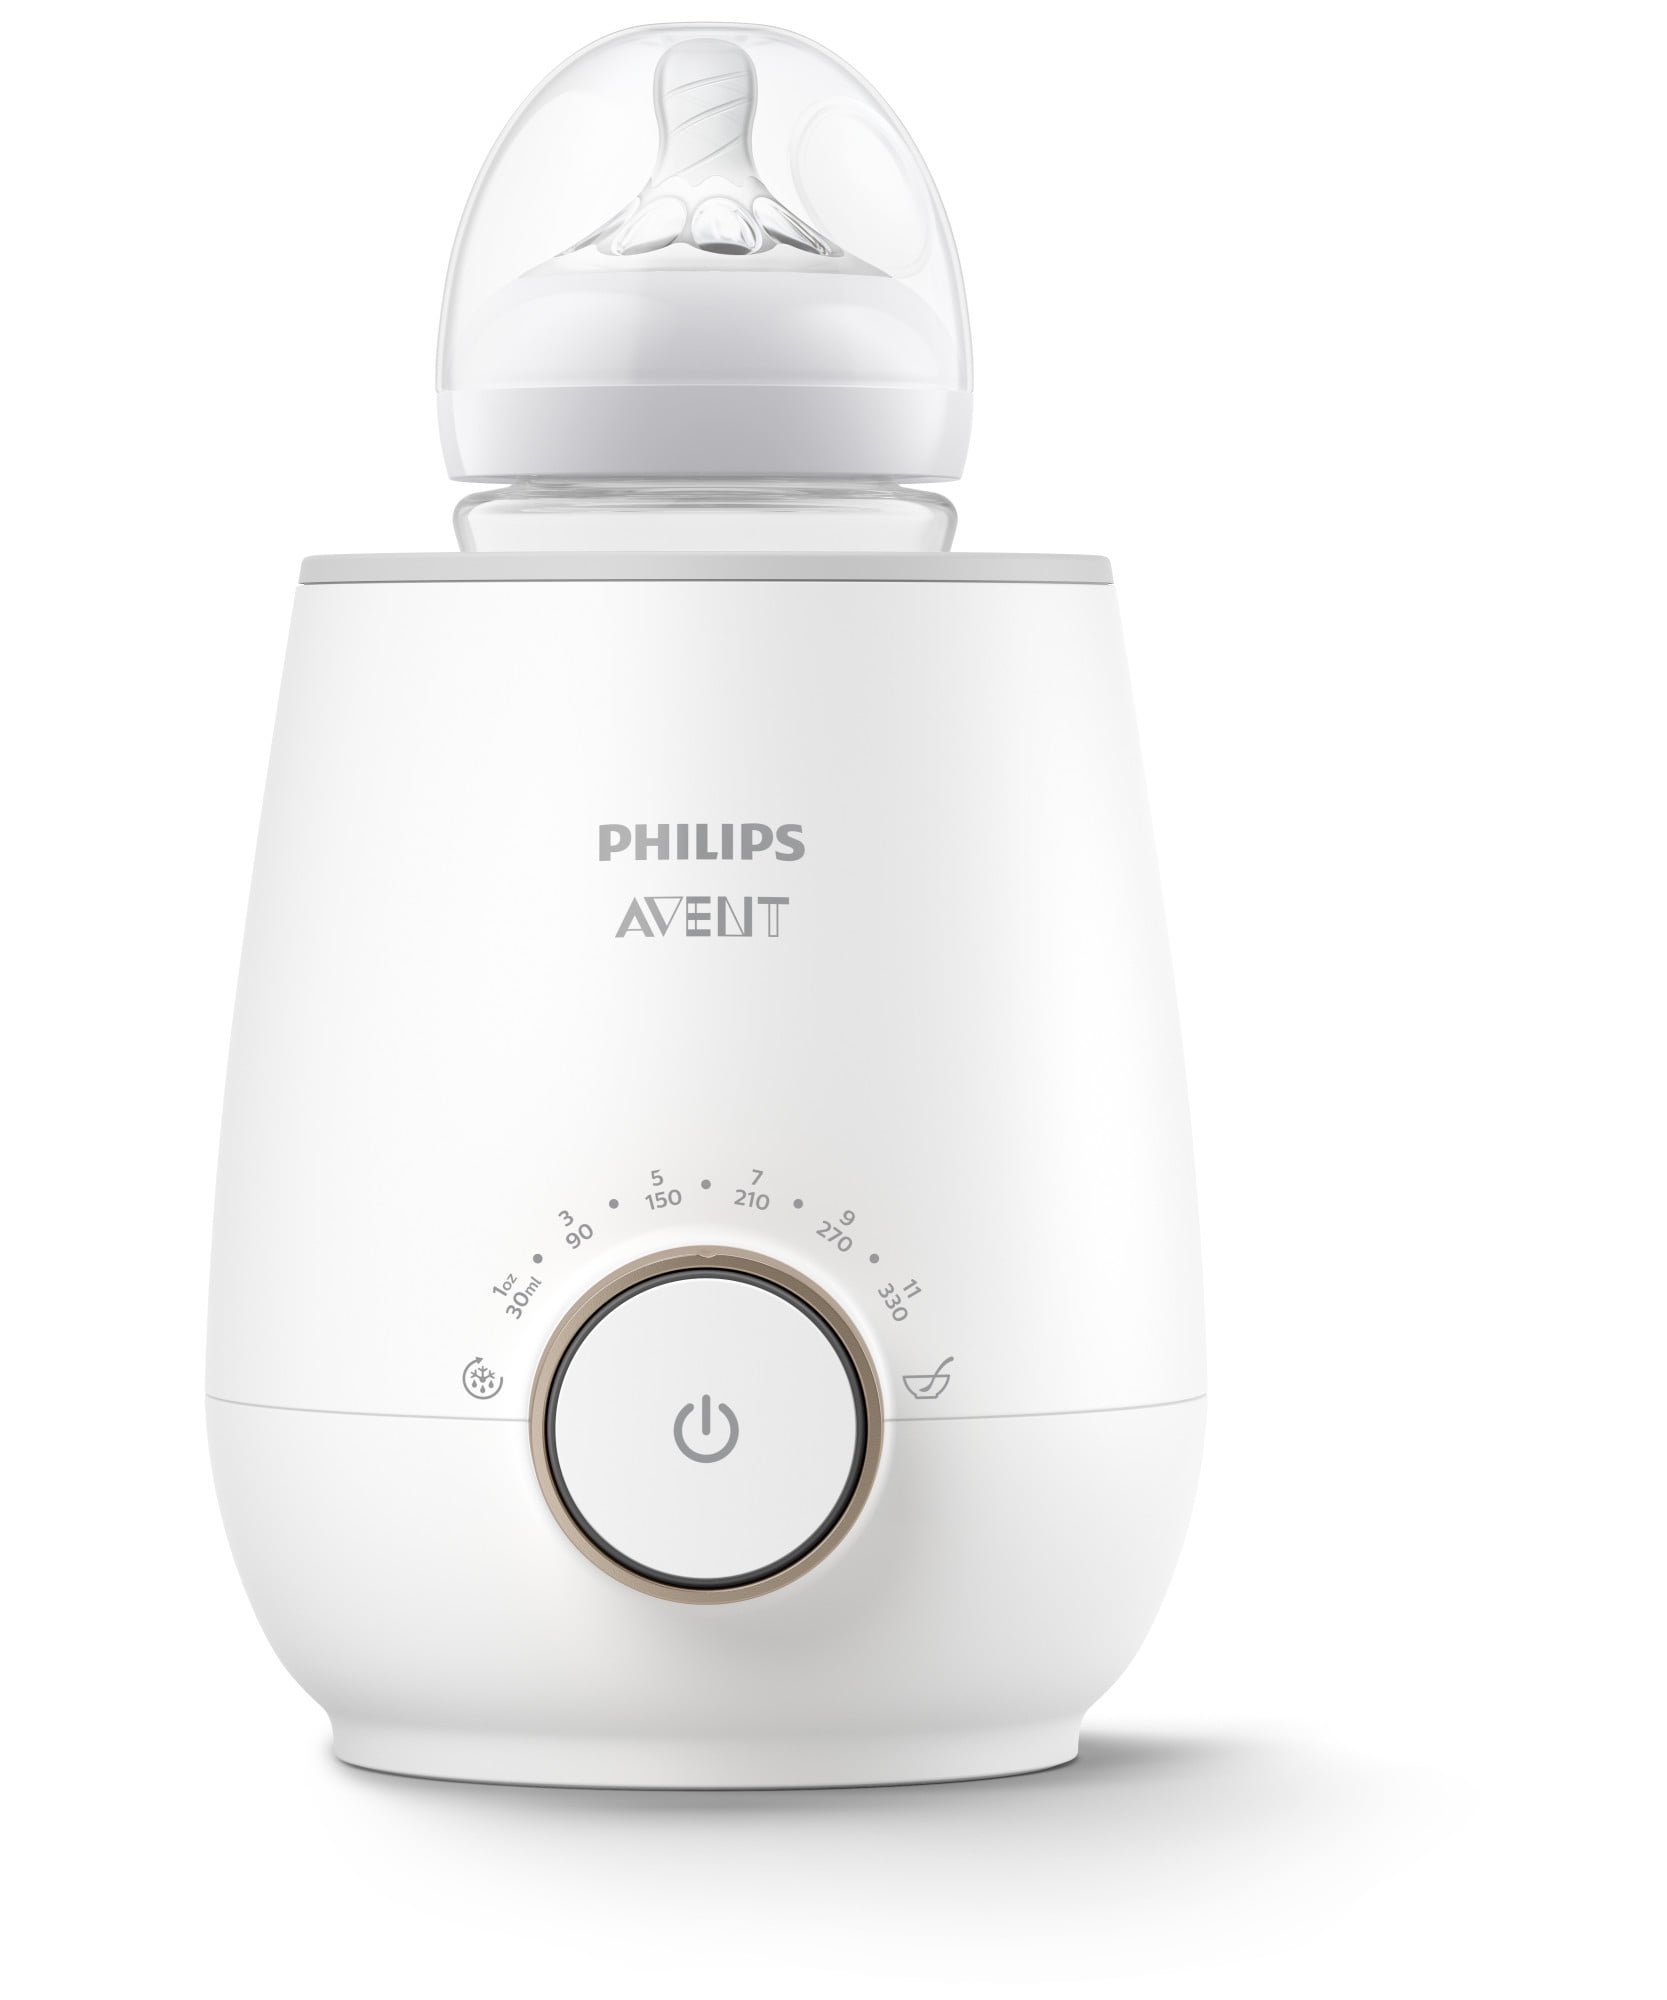 Philips Avent Fast Baby Bottle Warmer with Smart Temperature Control and Automatic Shut-Off SCF358/00